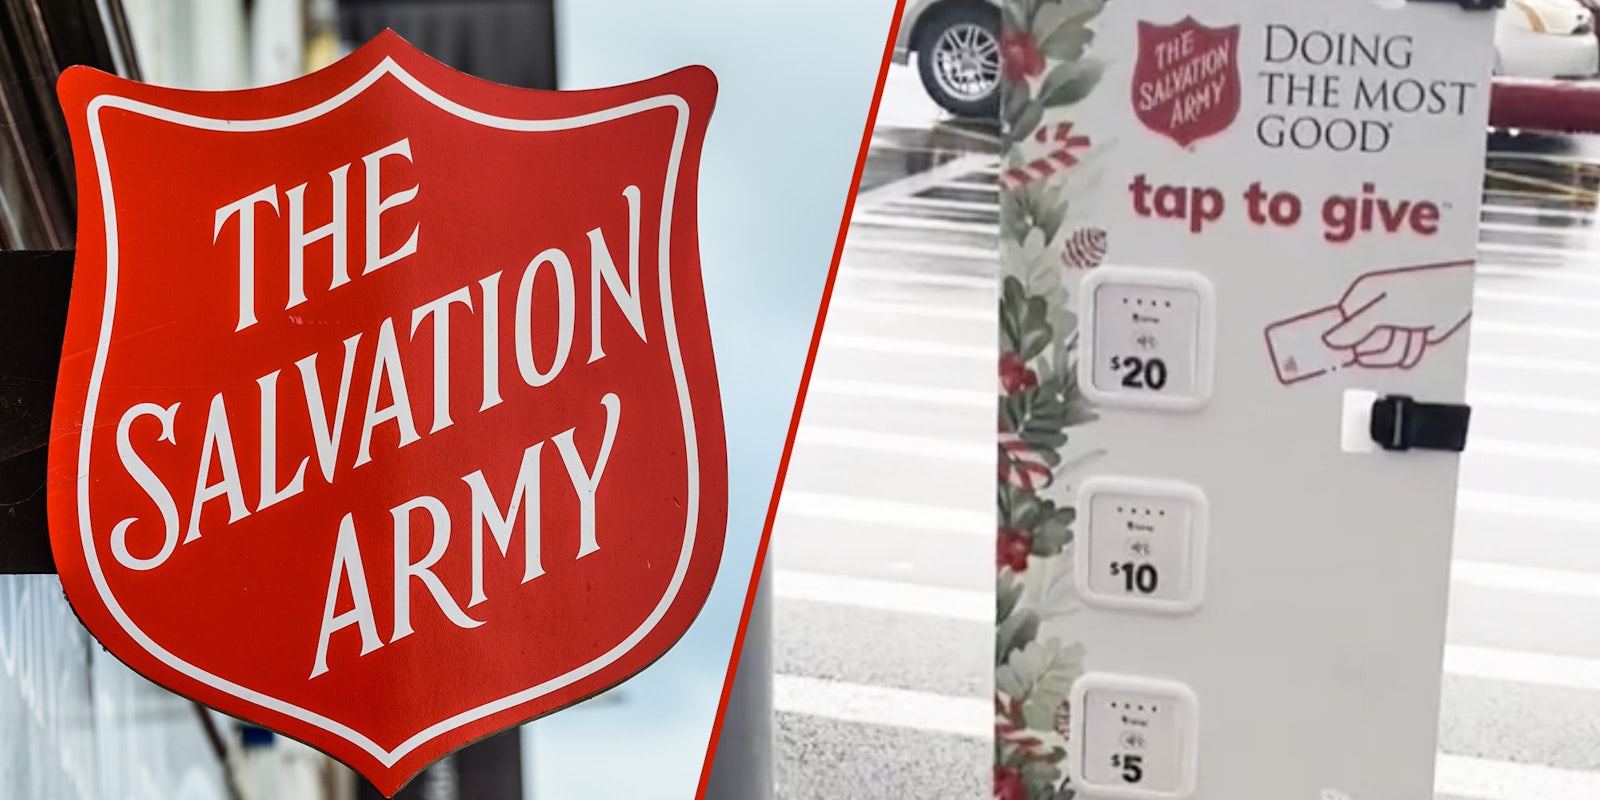 The Salvation Army sign(l), Donation sign(r)